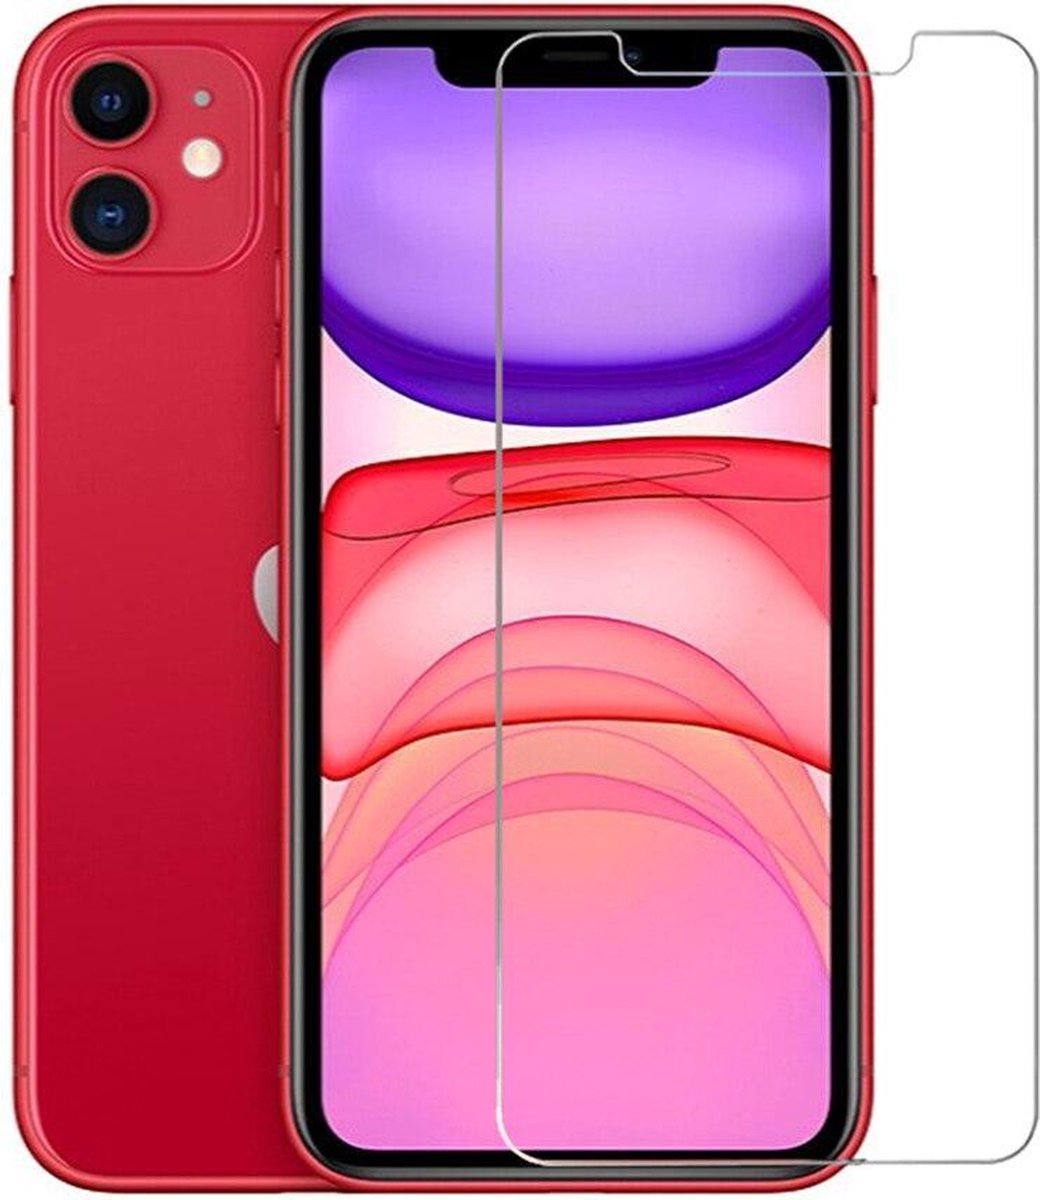 Tempered Glass screenprotector - iPhone 11